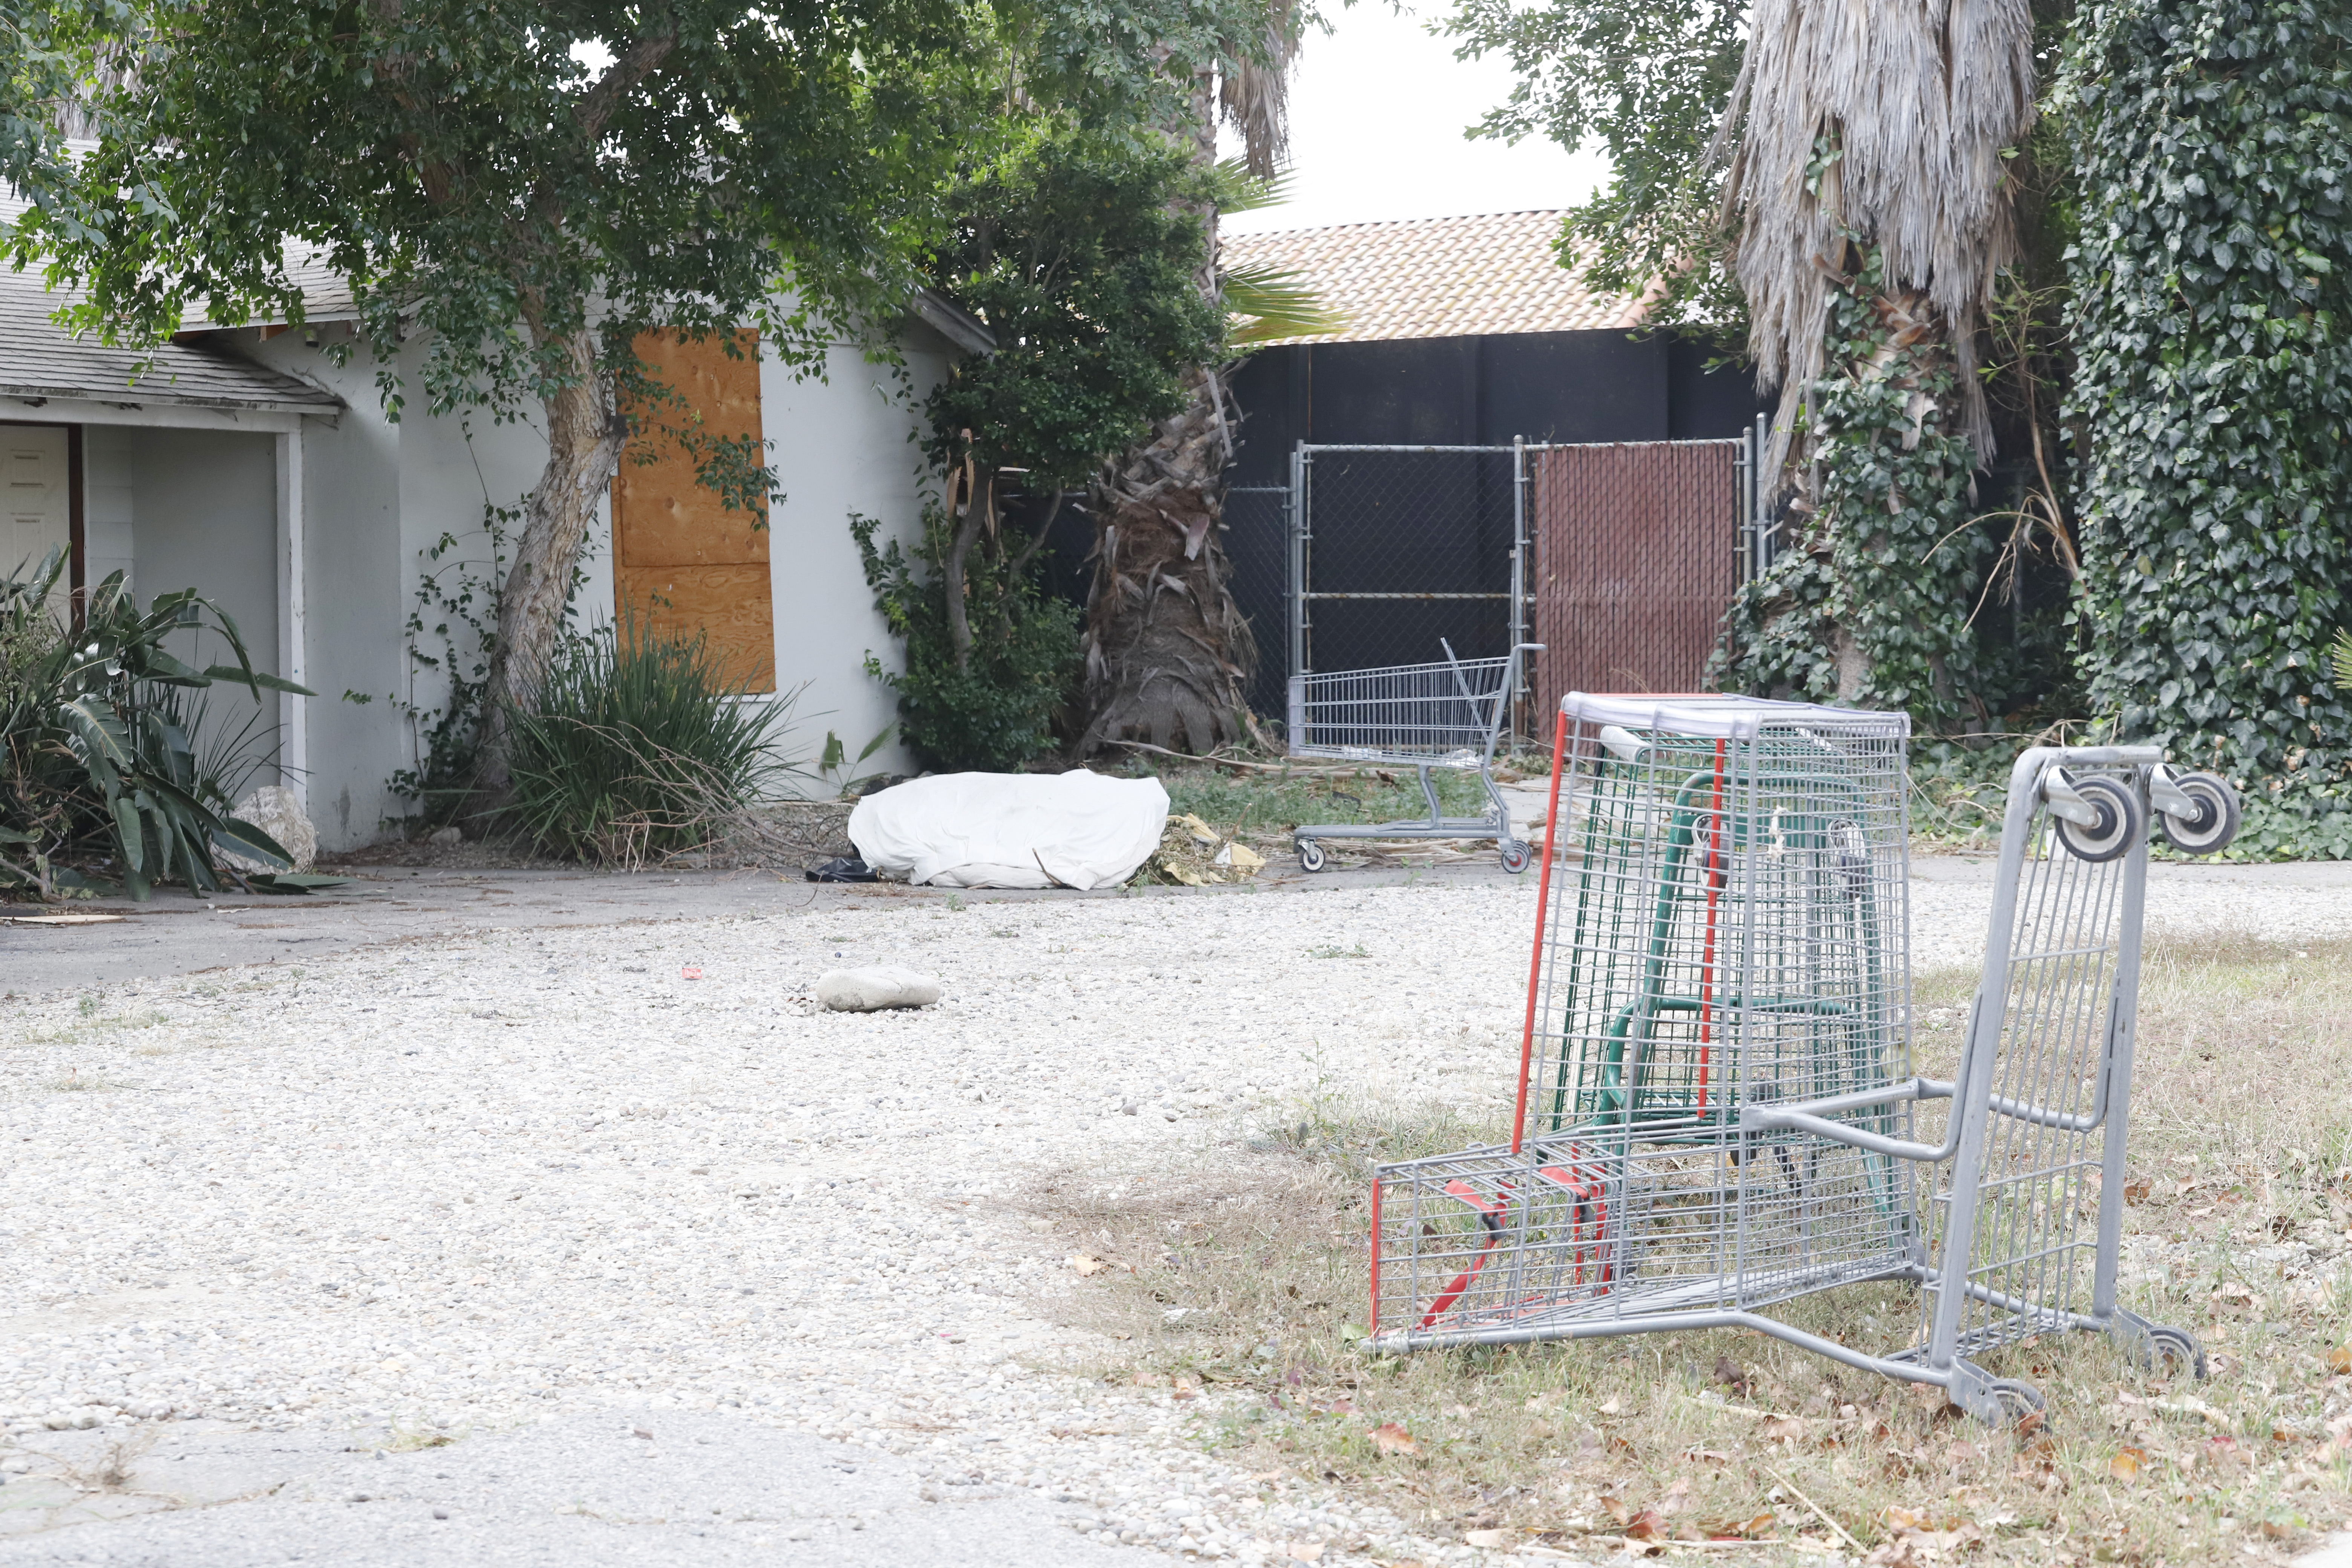 His $1.5million church building in Northridge has also seen better days with garbage and discarded shopping carts